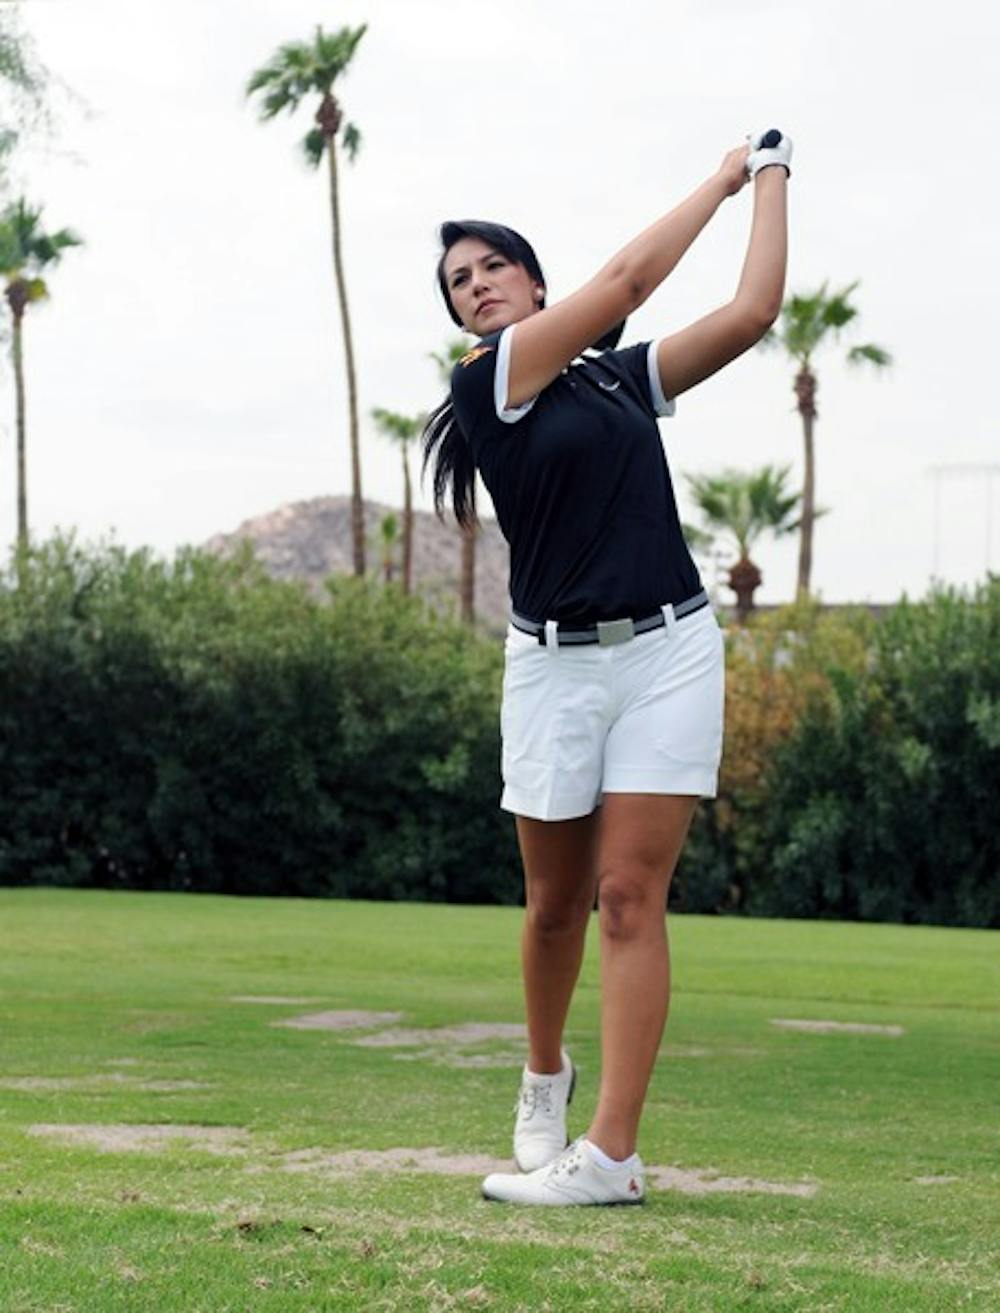 PERSEVERANCE: ASU sophomore Laura Blanco takes a practice swing during media day earlier this year. Blanco fought off back spasms to come back in the third round and help the Sun Devils secure a 10th-place finish. (Photo courtesy of Sun Devil Athletics)